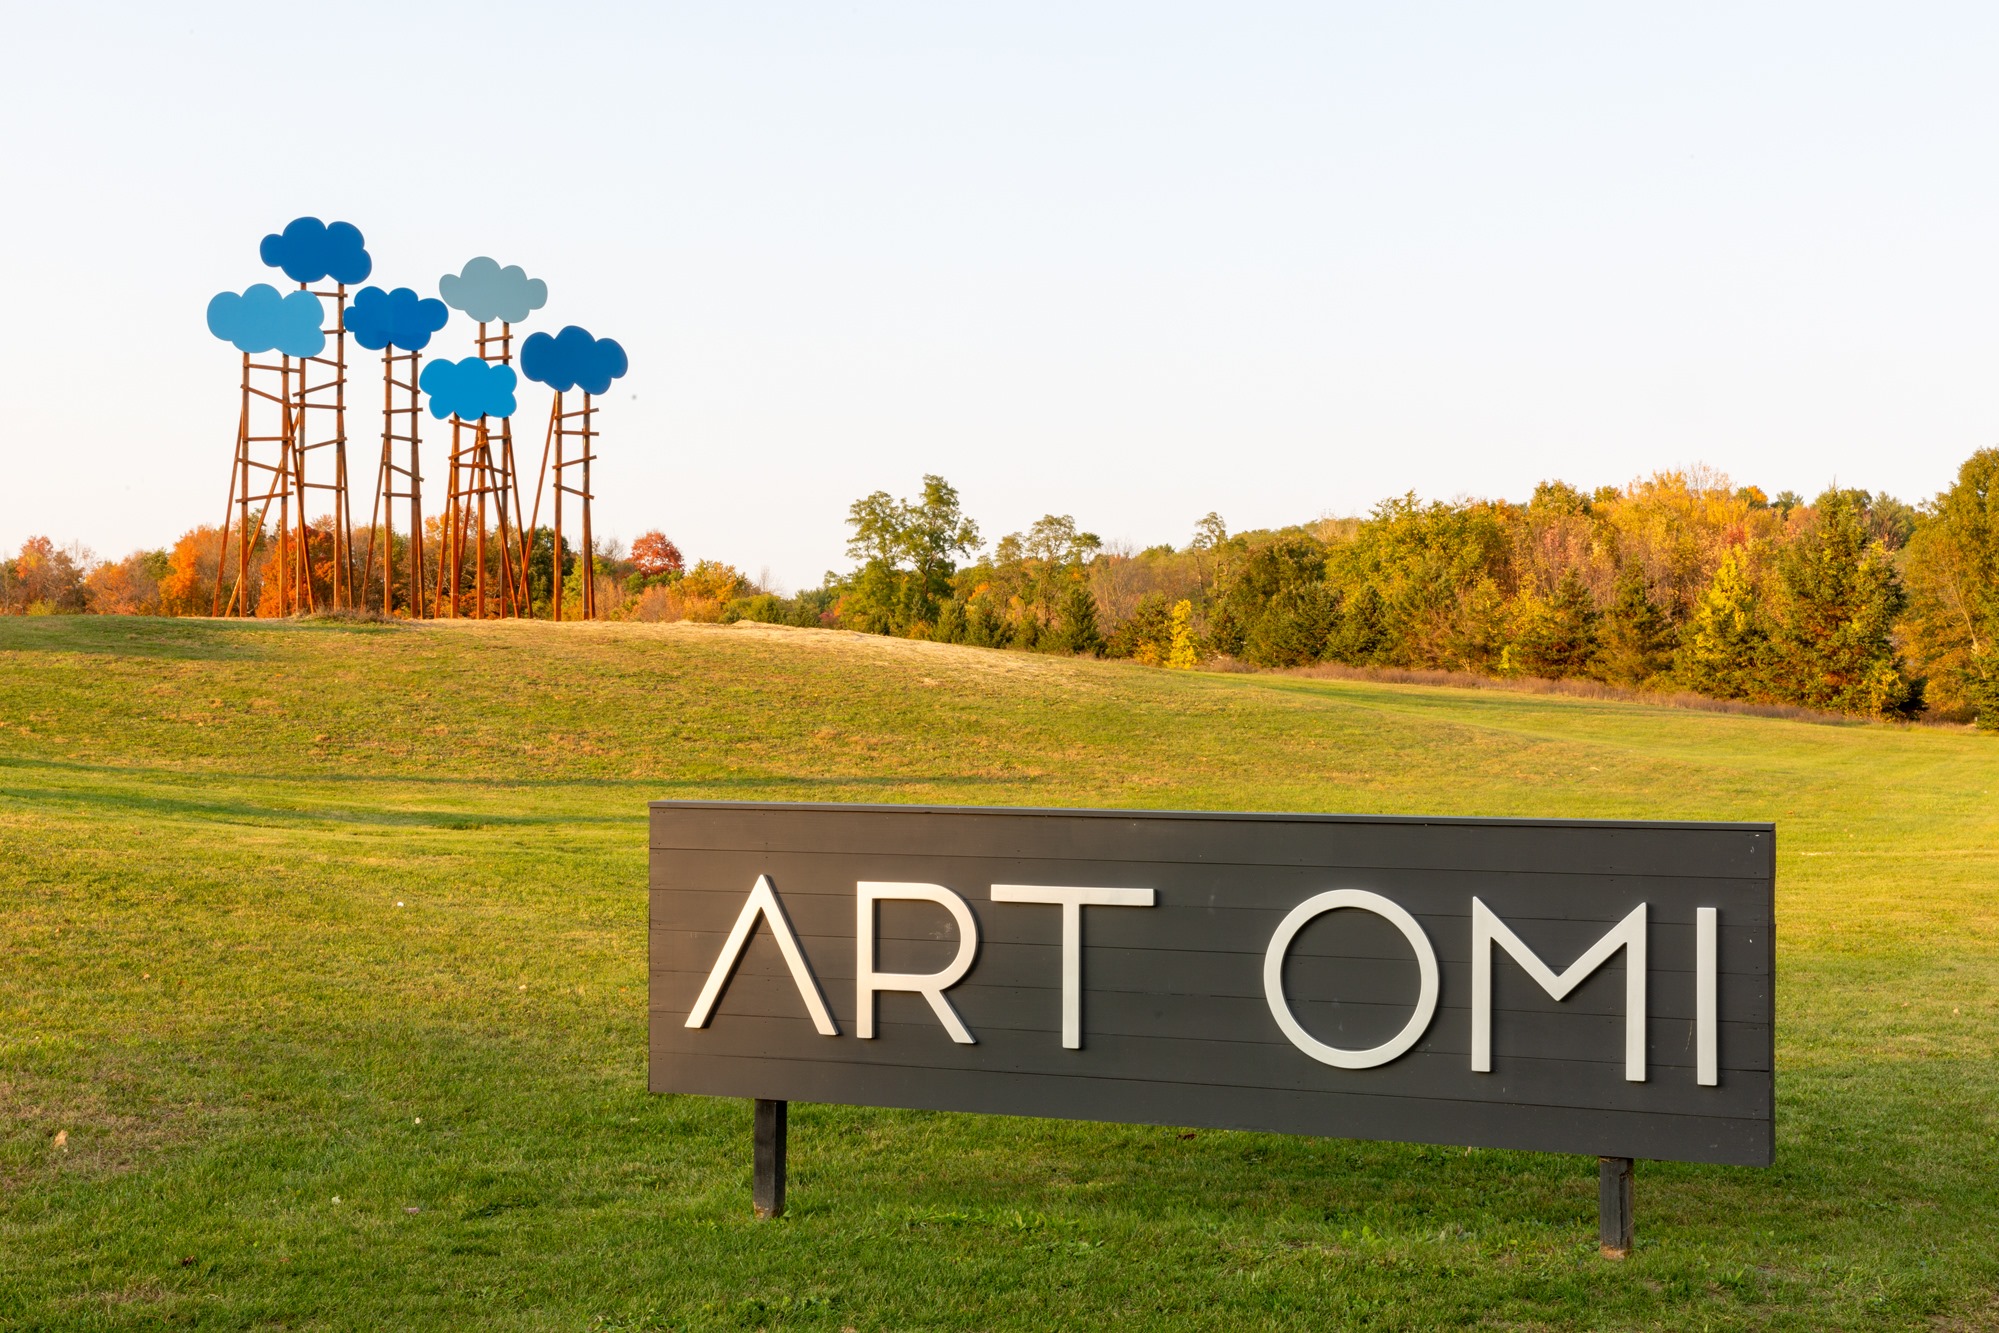 Art Omi offers residencies for dancers and musicians. Deadline to apply is January 2.